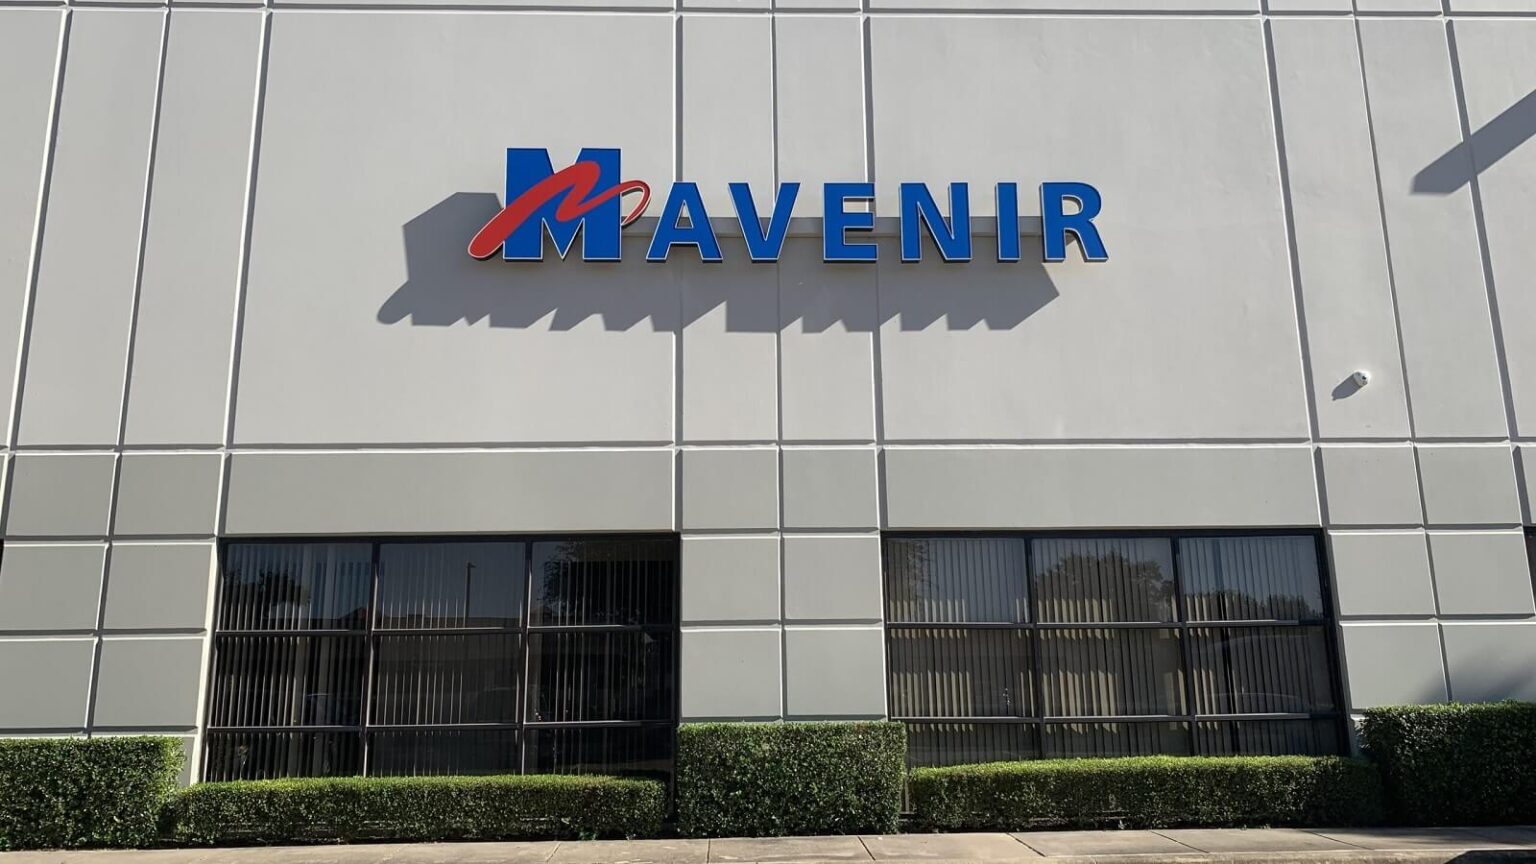 mavenir-off-campus-drive-2022-hiring-freshers-as-test-engineers-of-any-graduate-degree